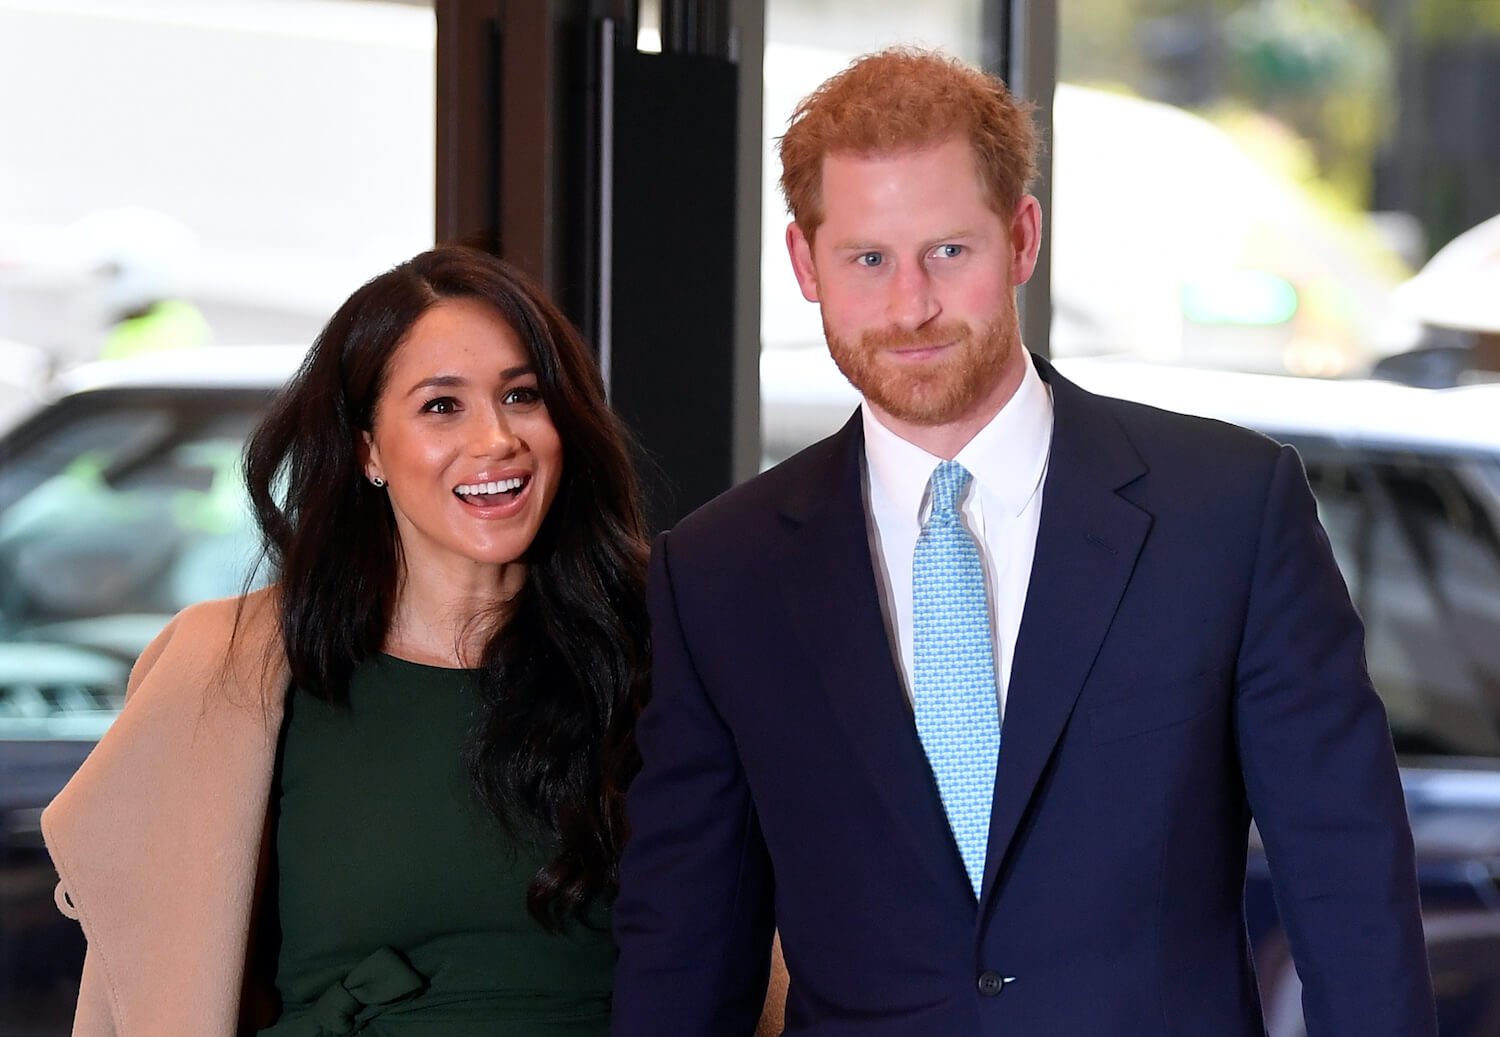 Royal Expert Predicts Prince Harry and Meghan Markle Will Be ‘Sidelined’ and ‘Shunned’ at Coronation: ‘Too Many Bridges Have Been Burned’